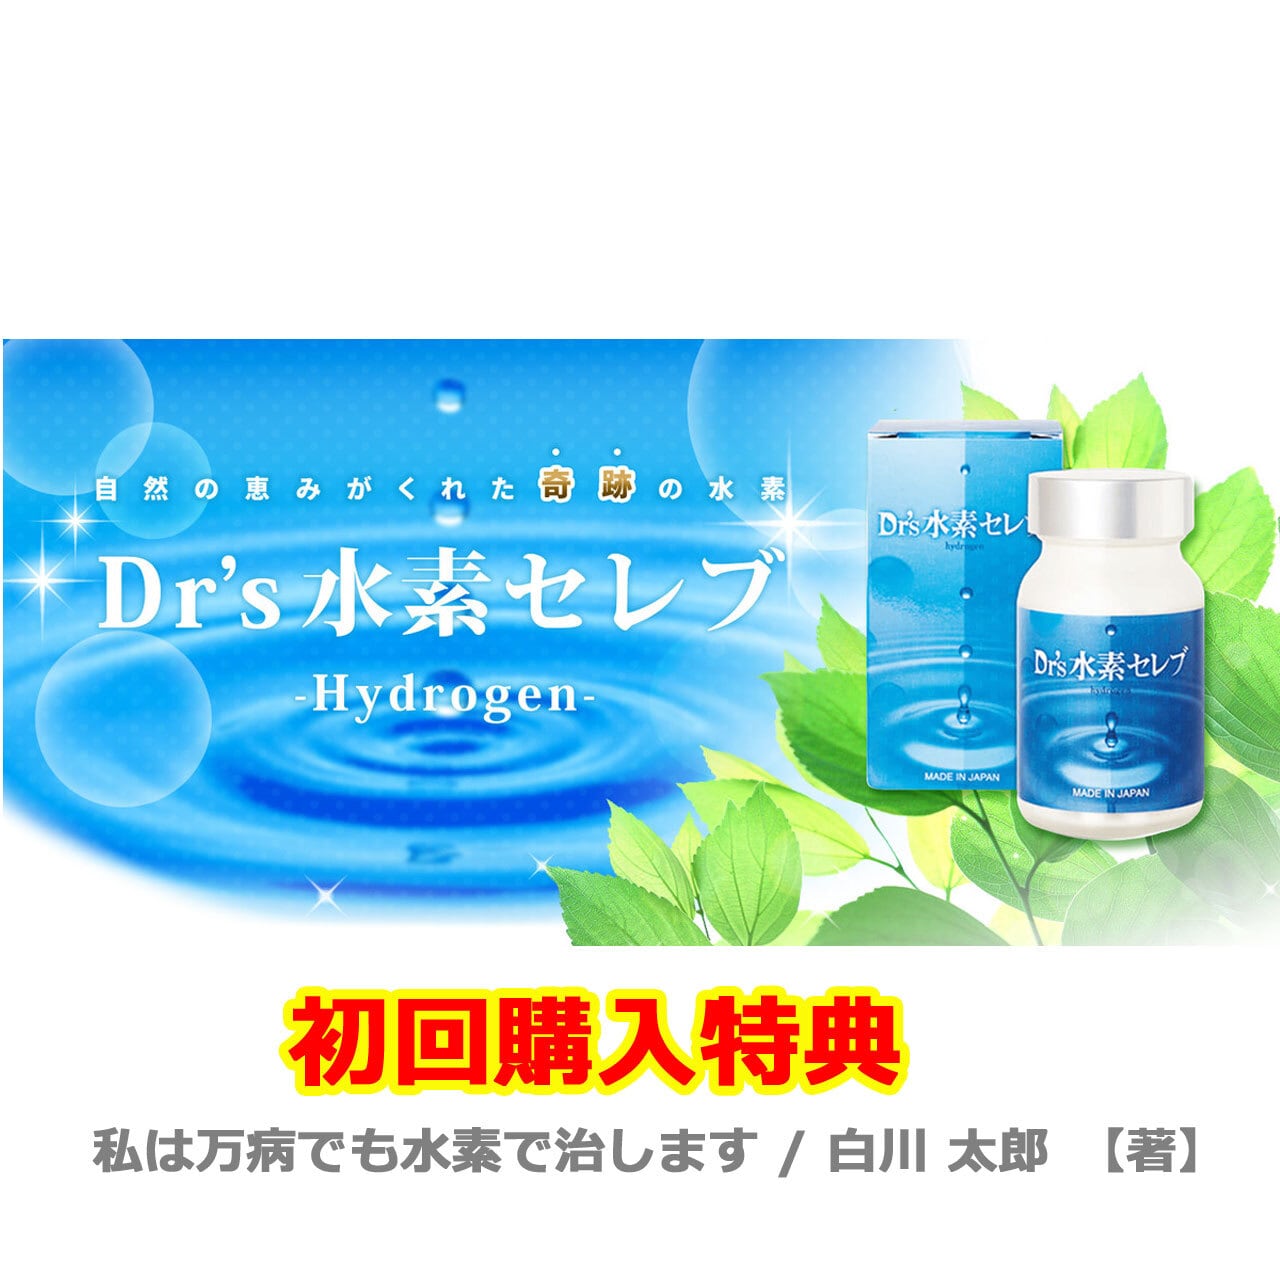 Dr's水素セレブ（ドクターズ水素セレブ）30日分 90粒 | octawellness powered by BASE